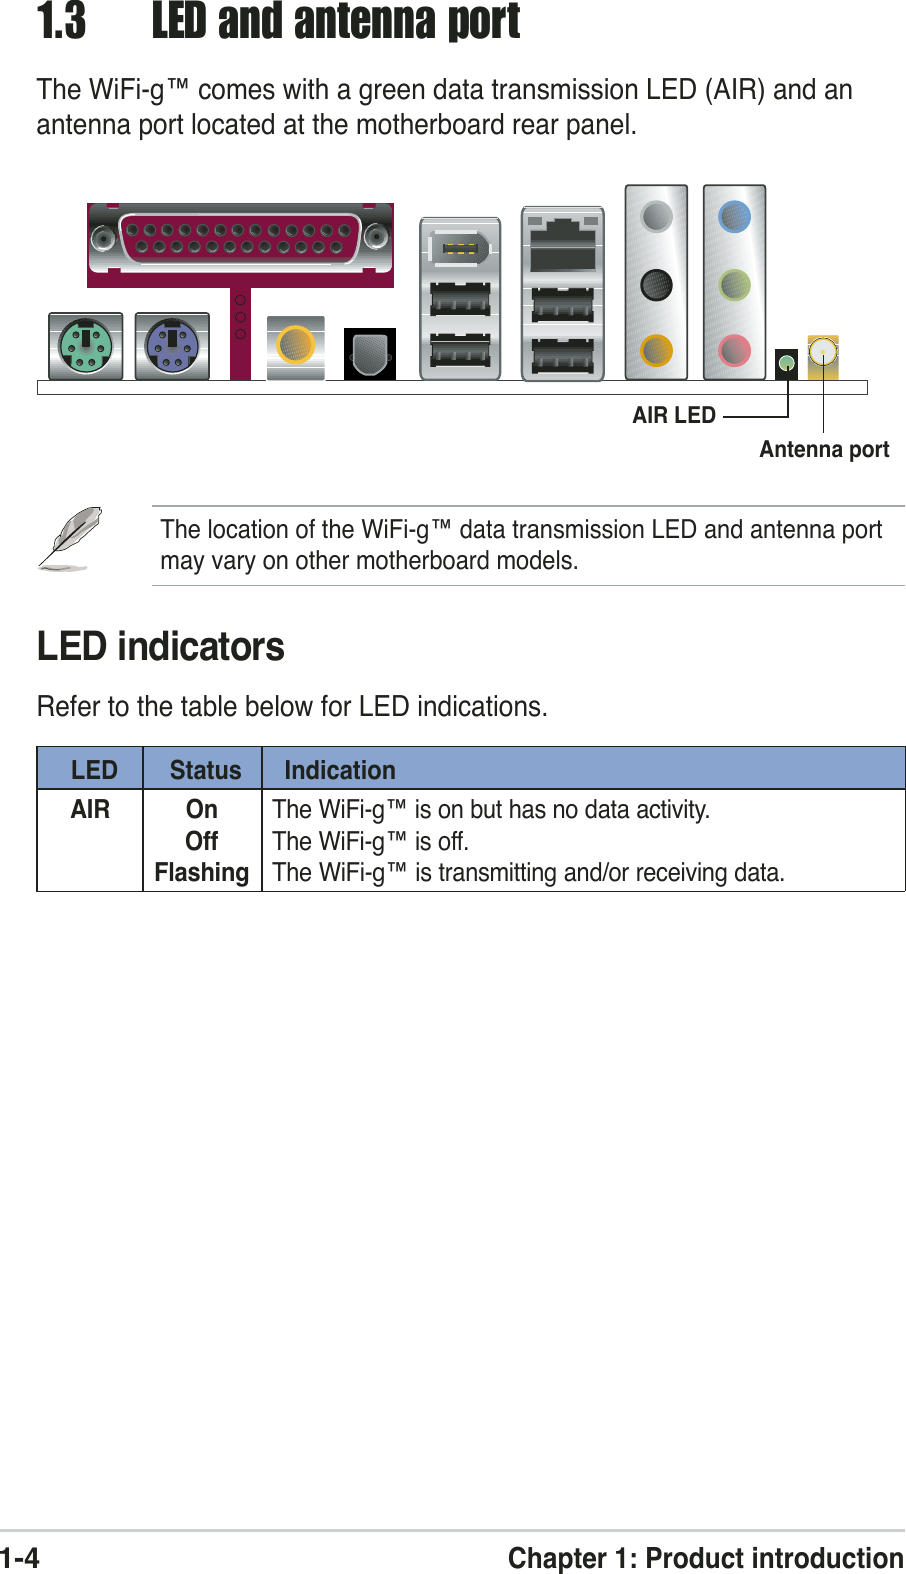 1-4Chapter 1: Product introductionLED indicatorsRefer to the table below for LED indications.LED Status IndicationAIR On The WiFi-g™ is on but has no data activity.Off The WiFi-g™ is off.Flashing The WiFi-g™ is transmitting and/or receiving data.1.3 LED and antenna portThe WiFi-g™ comes with a green data transmission LED (AIR) and anantenna port located at the motherboard rear panel.The location of the WiFi-g™ data transmission LED and antenna portmay vary on other motherboard models.AIR LEDAntenna port